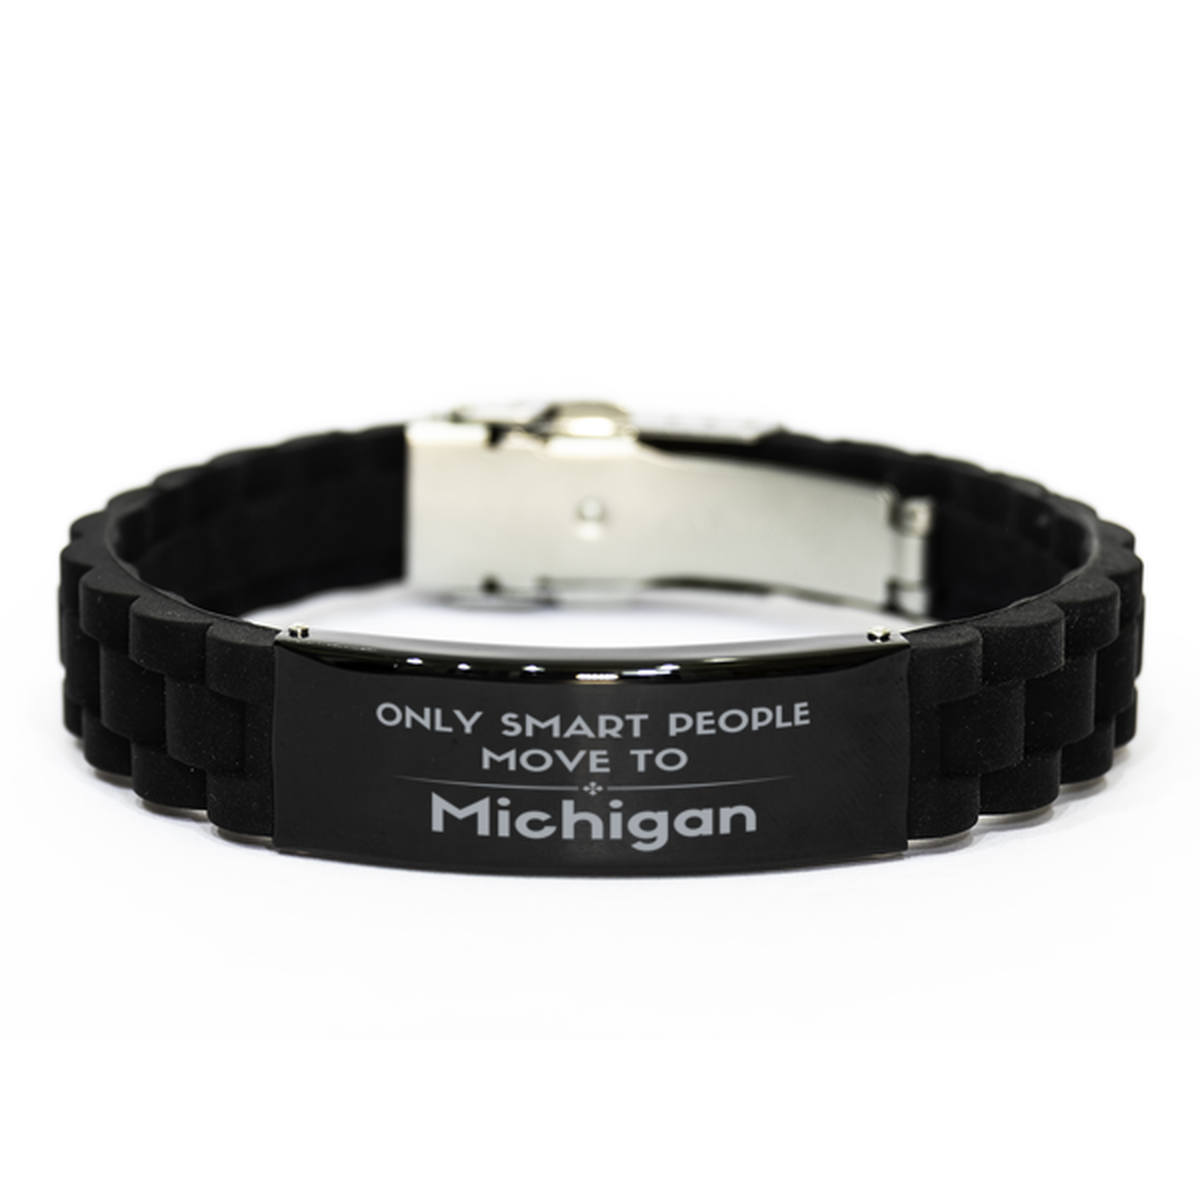 Only smart people move to Michigan Black Glidelock Clasp Bracelet, Gag Gifts For Michigan, Move to Michigan Gifts for Friends Coworker Funny Saying Quote